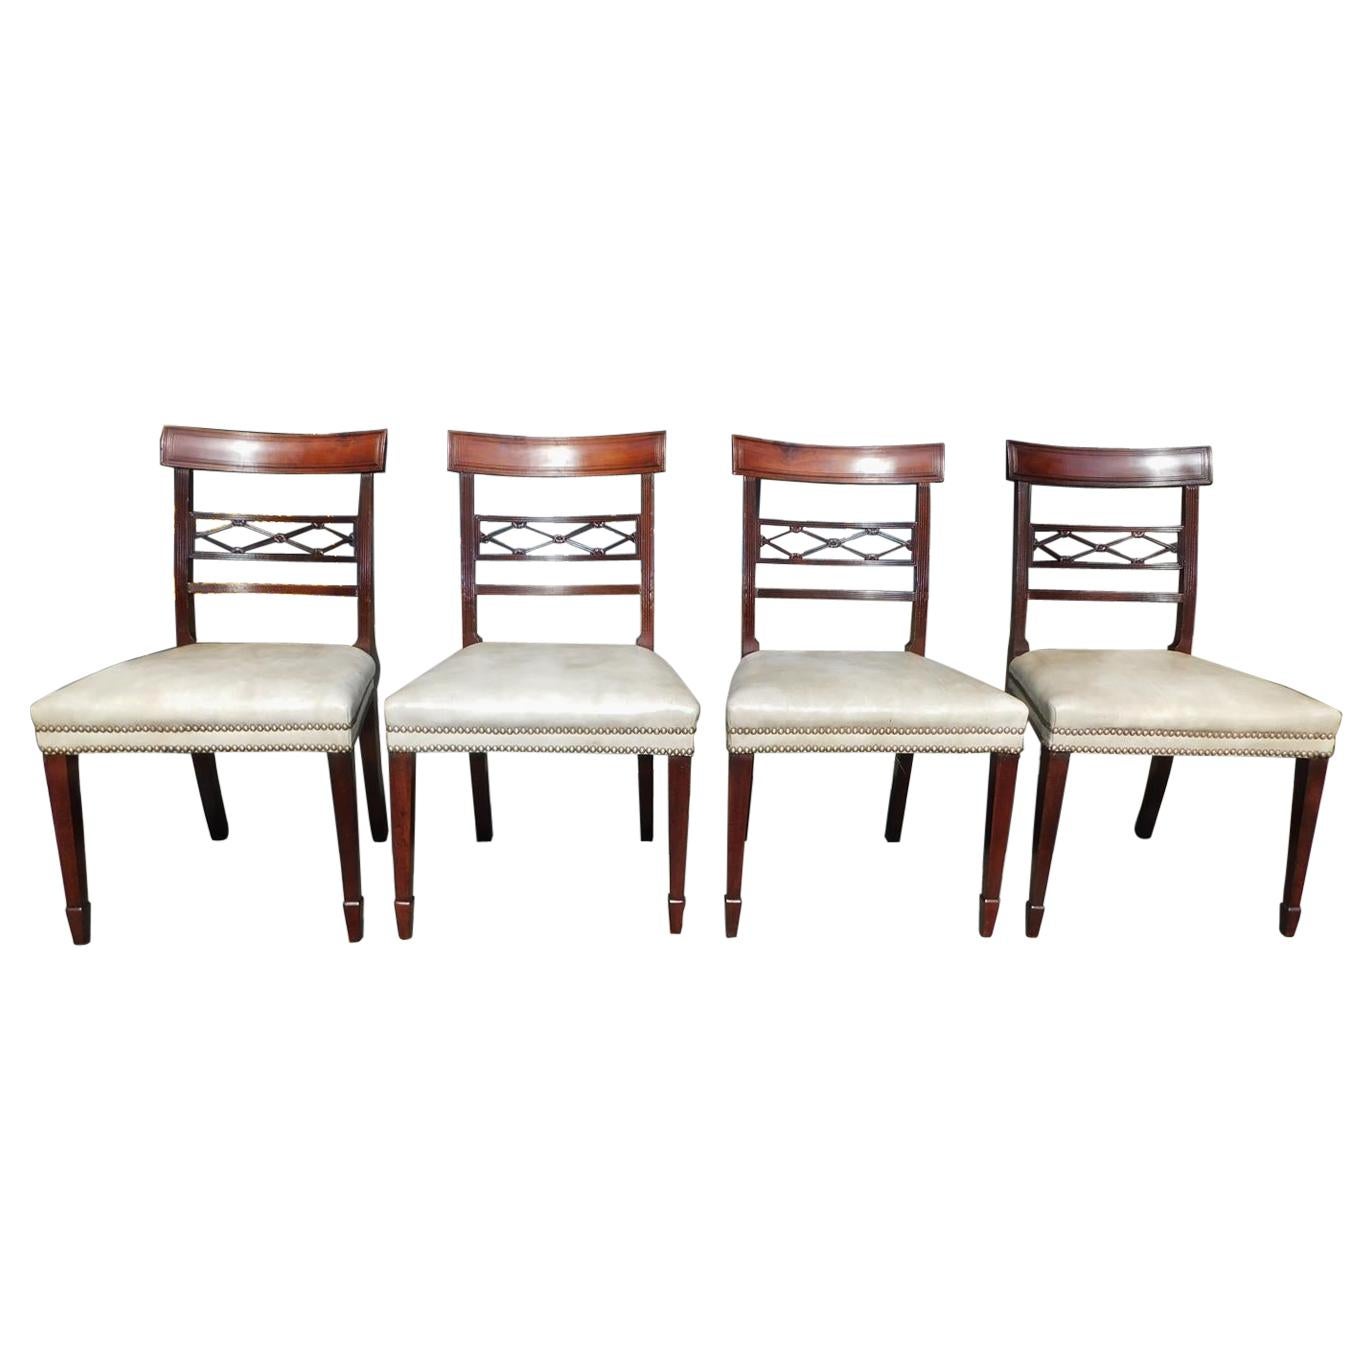 Set of four English Regency mahogany upholstered and brass tacked dining room chairs with floral reeded cross hatching and terminating on tapered squared legs with spade feet. Set consist of four sides. Early 19th century.